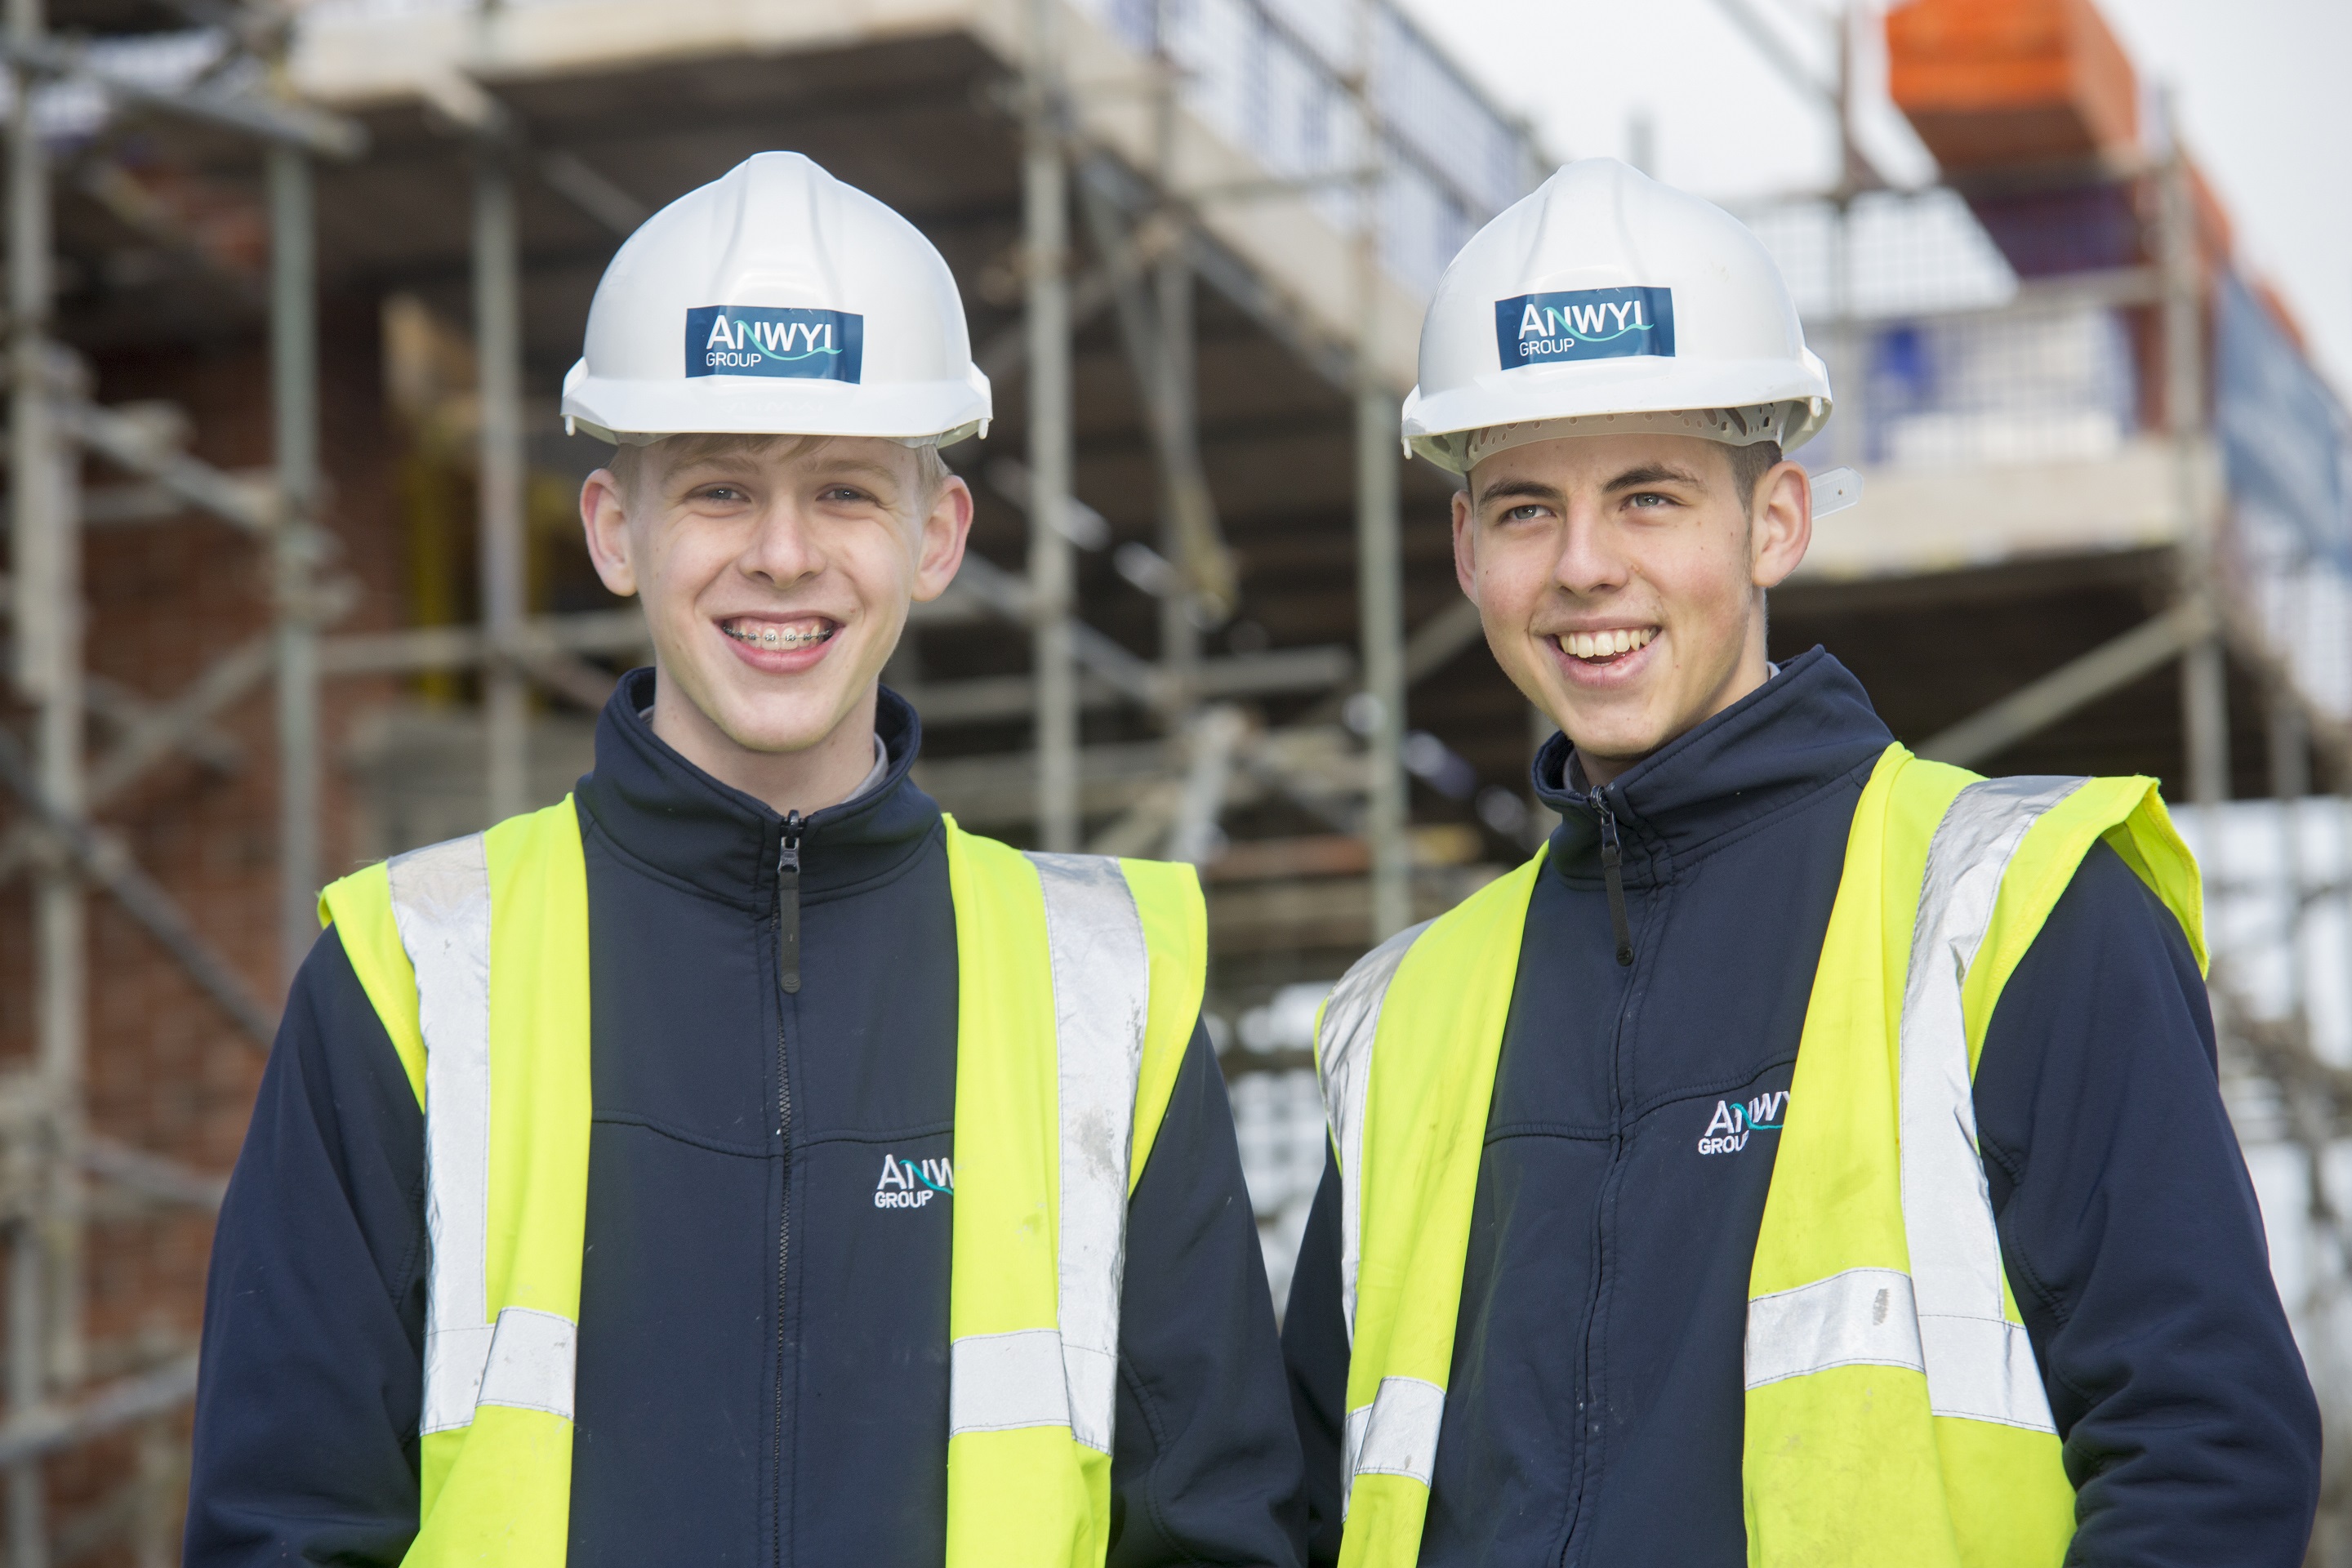 Anwyl homes takes two trainee assistant site managers from Coleg Cambria